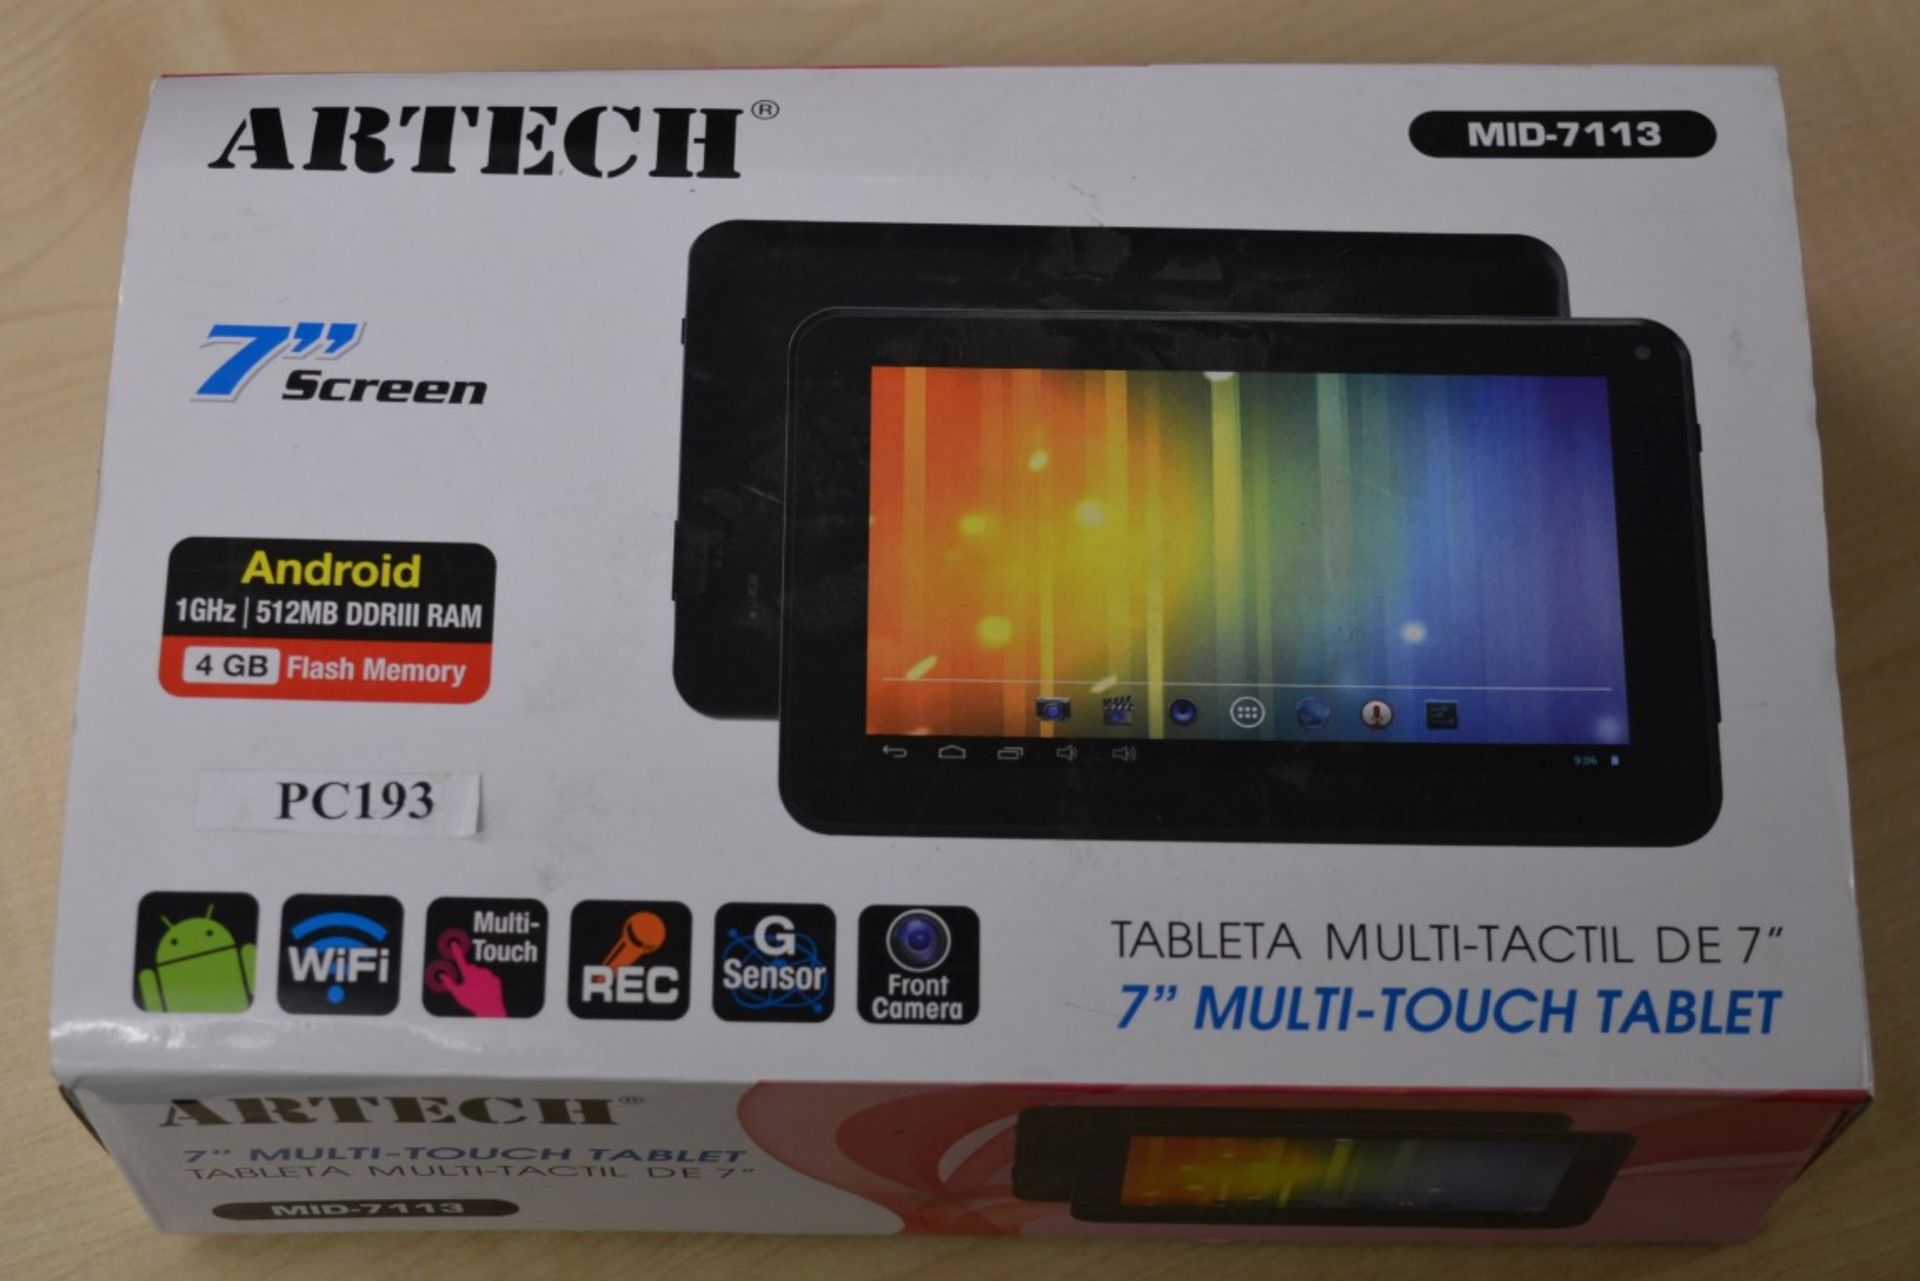 1 x Artech 7 Inch Tablet Computer - Spares or Repairs - Cracked Screen - 1ghz Processor, 512mb Ram, - Image 3 of 6